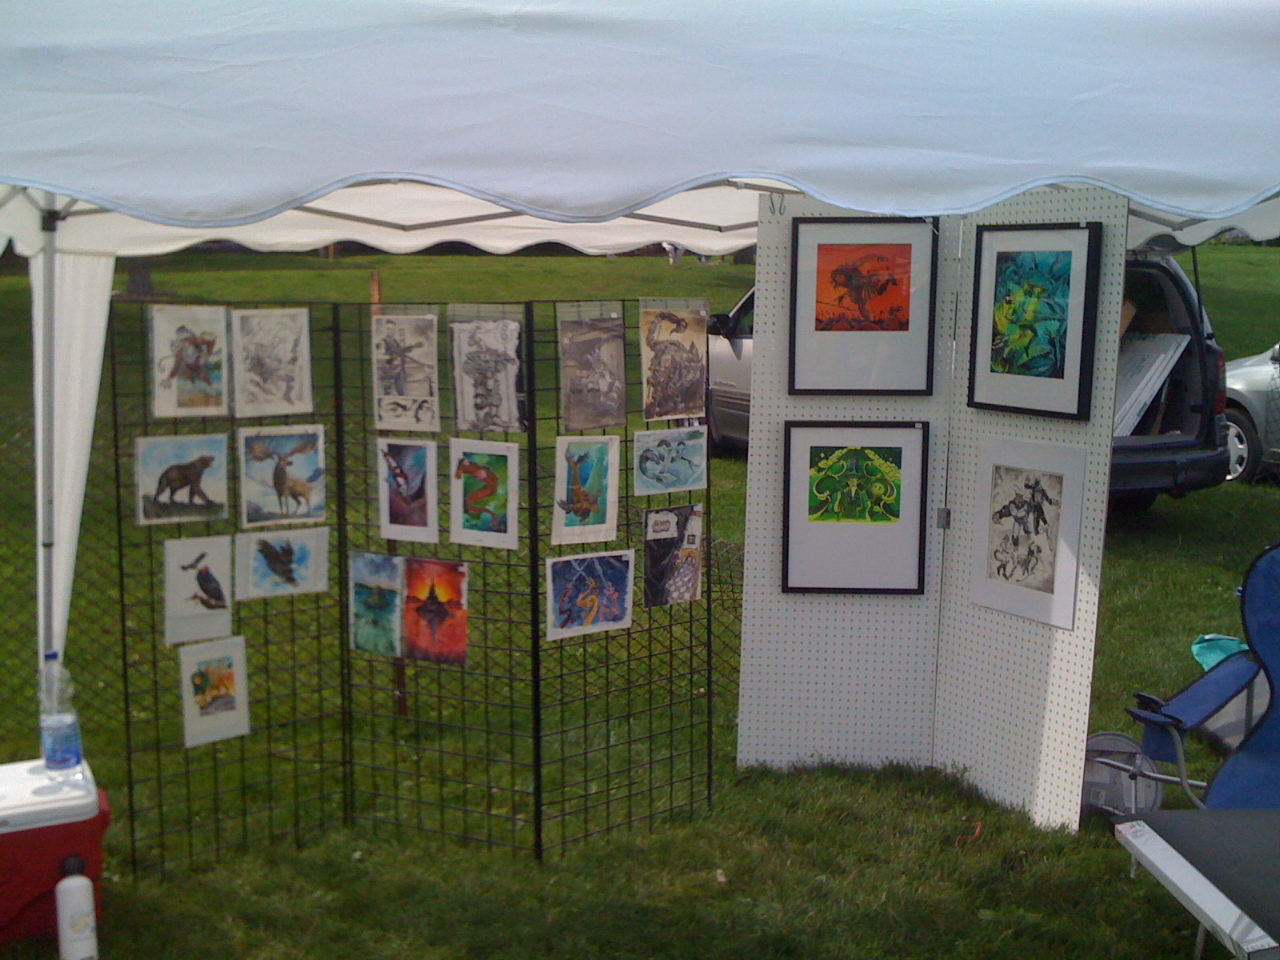 Mike's awesome set up at his first appearance at Art in the Park